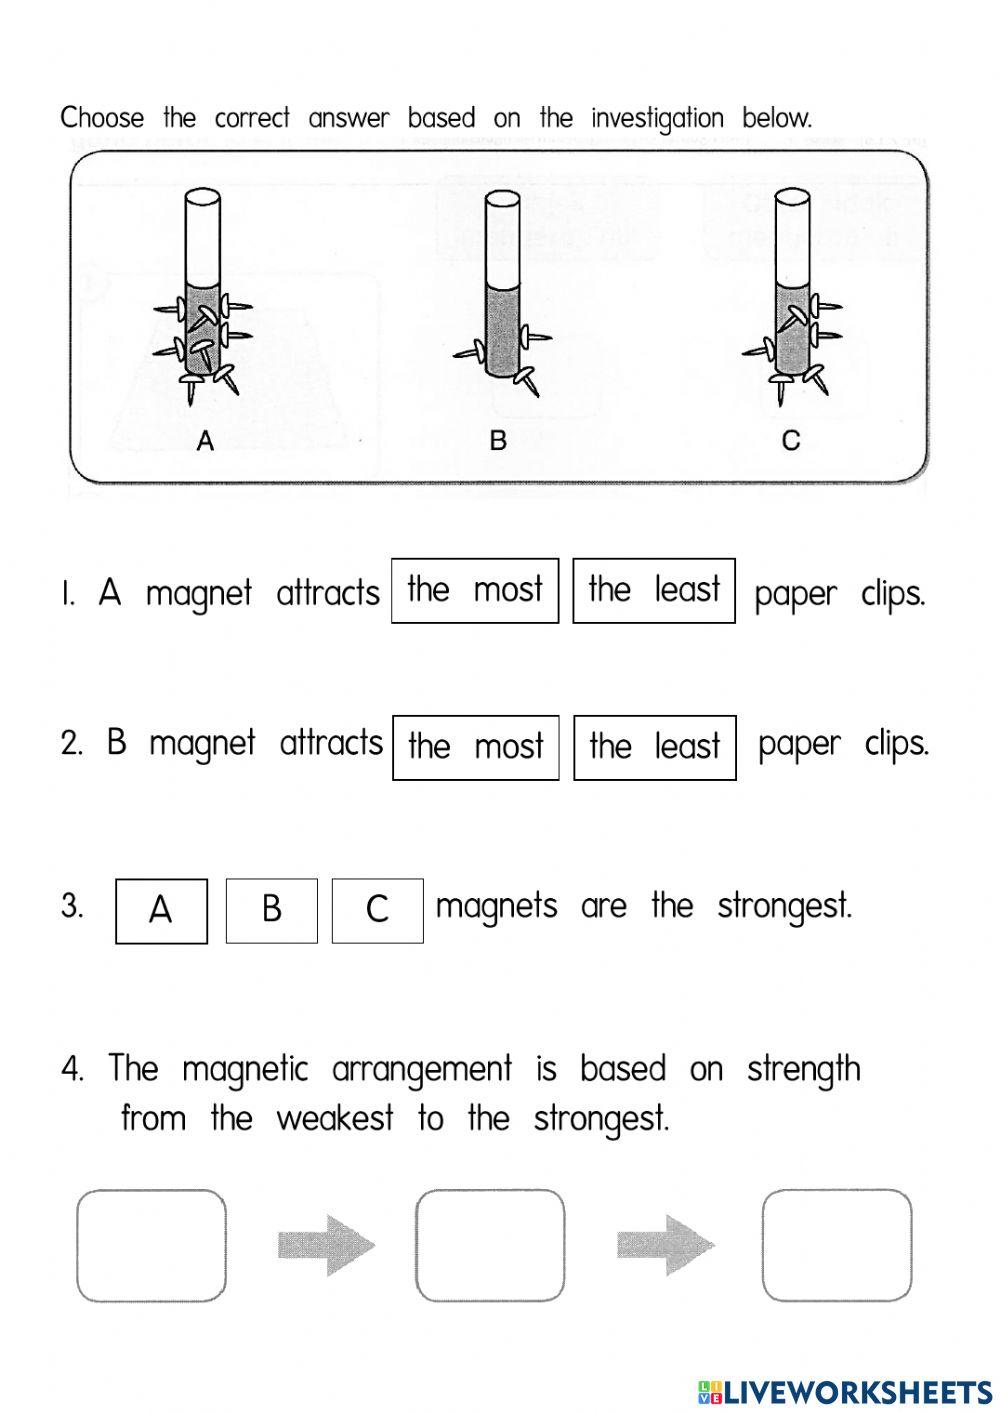 The strength of a magnet